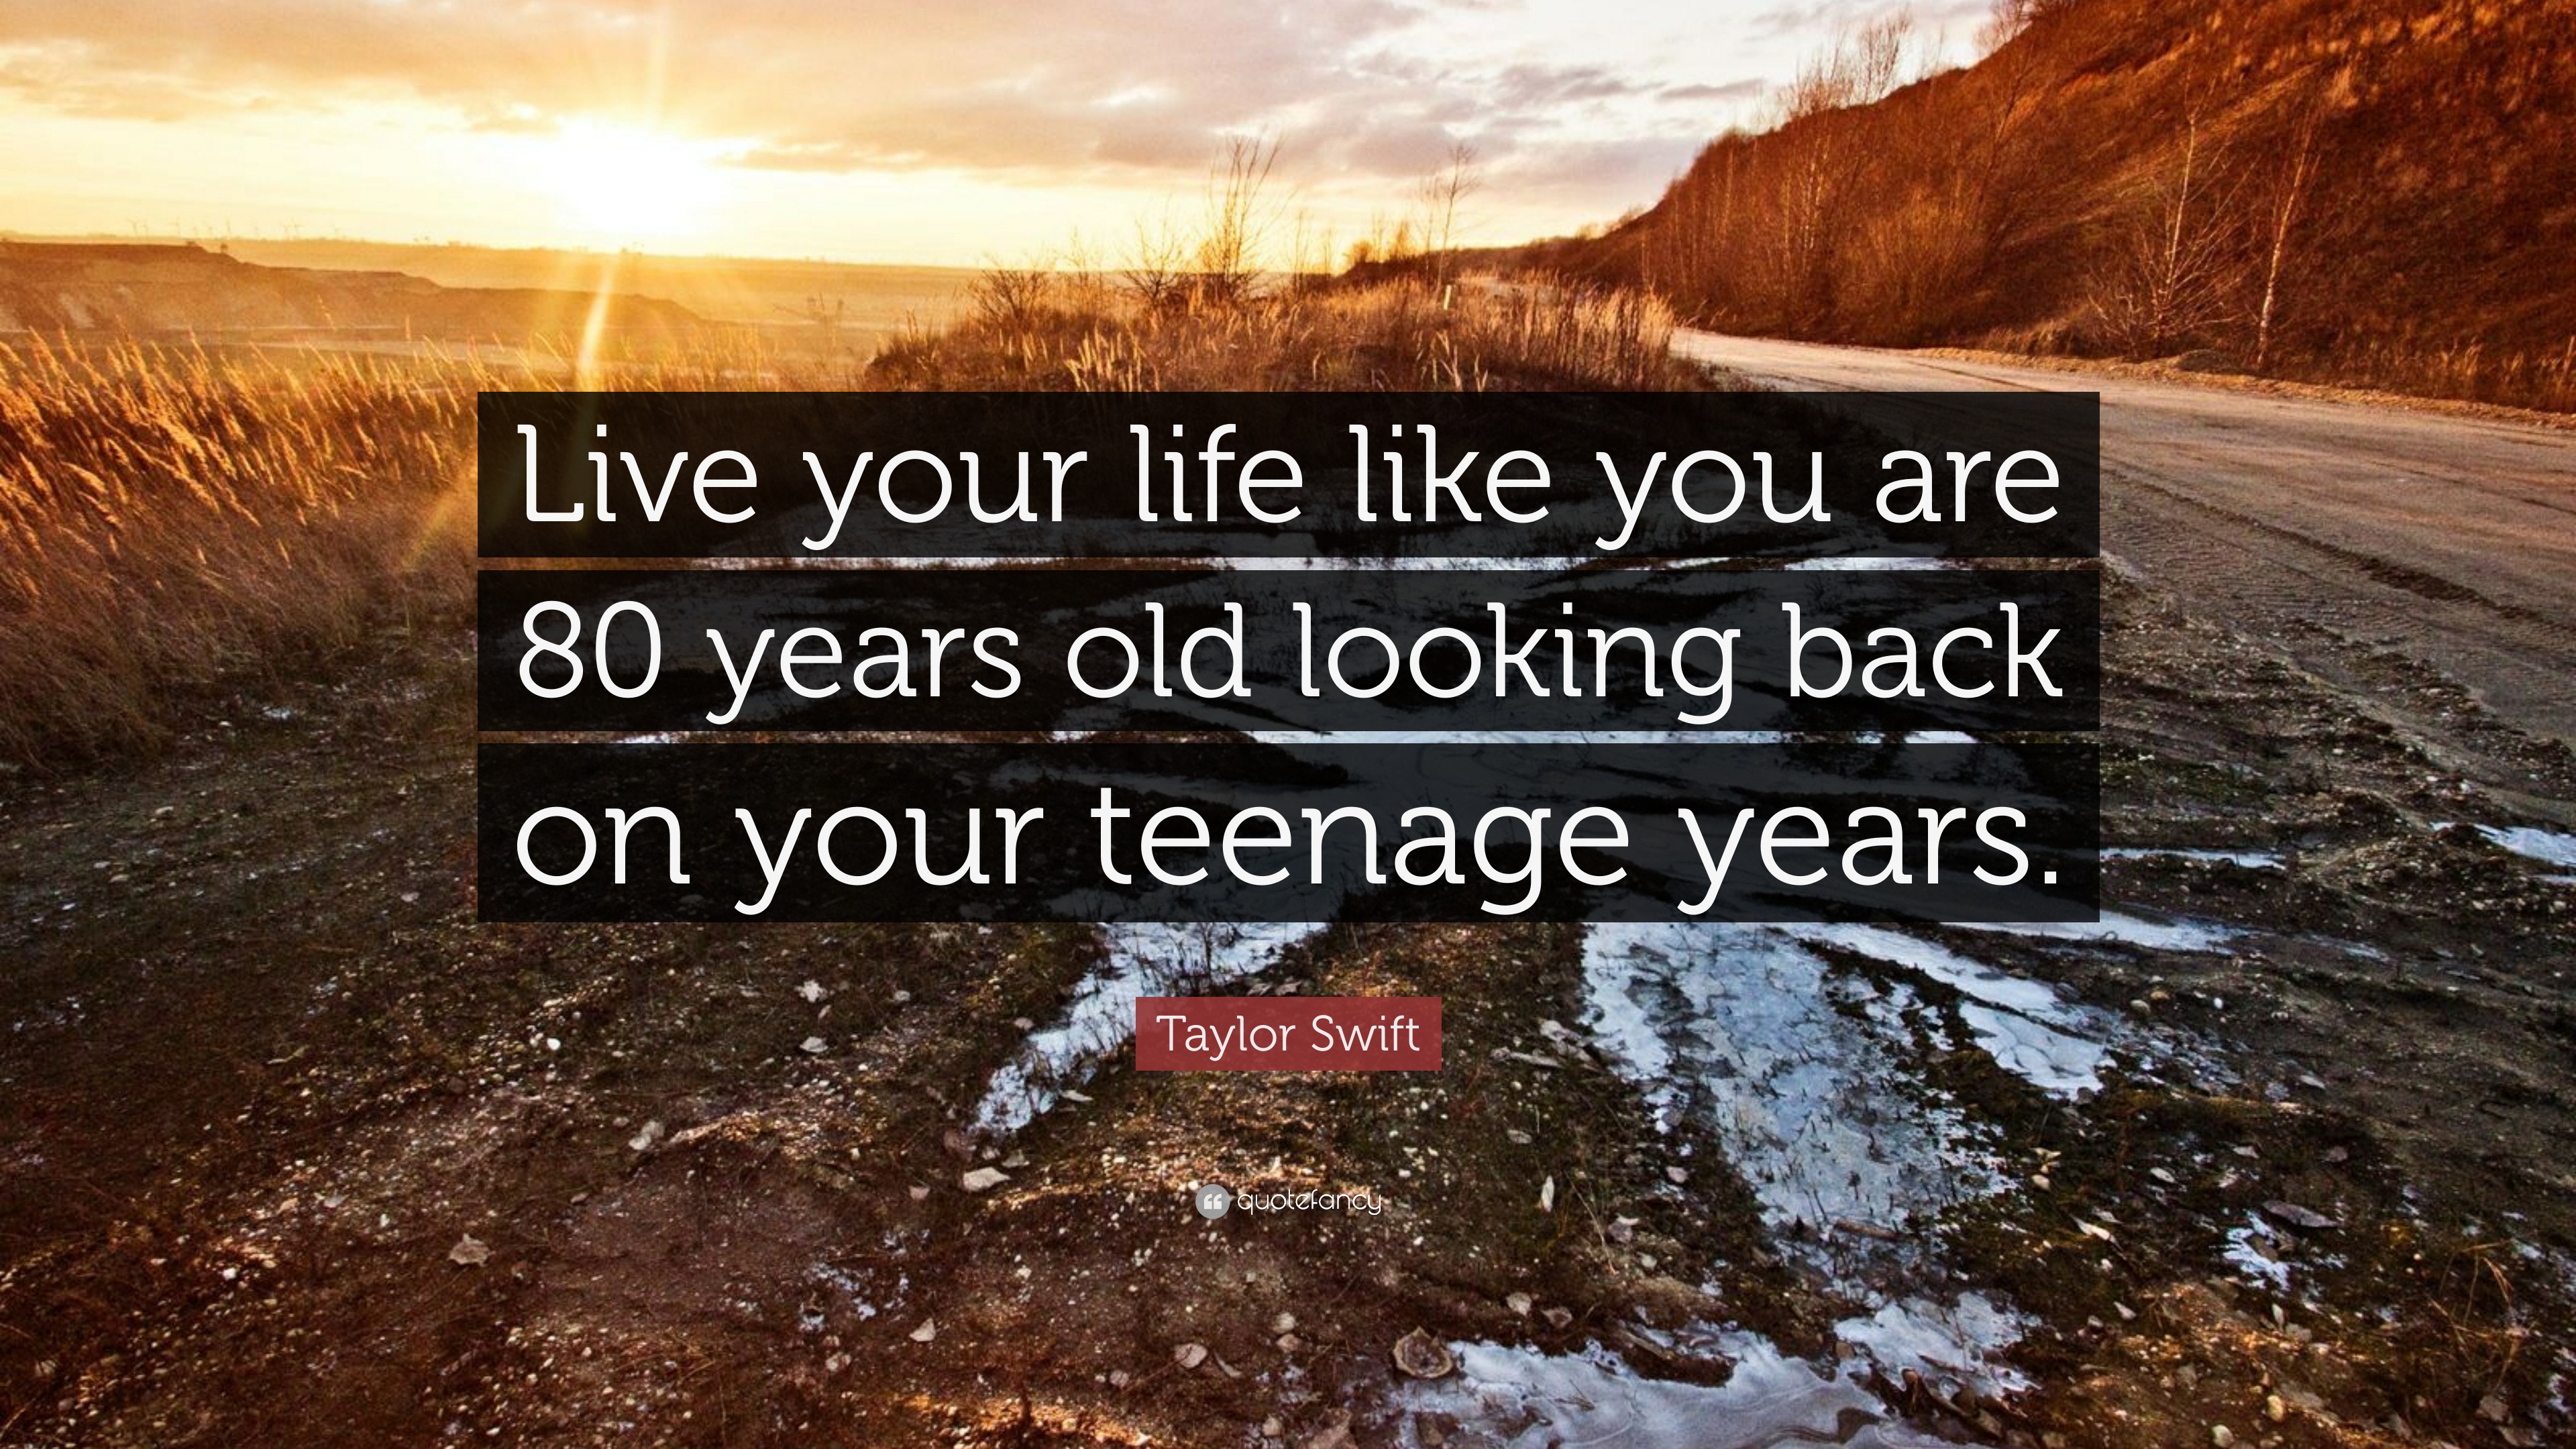 teenage life quotes and sayings to live by